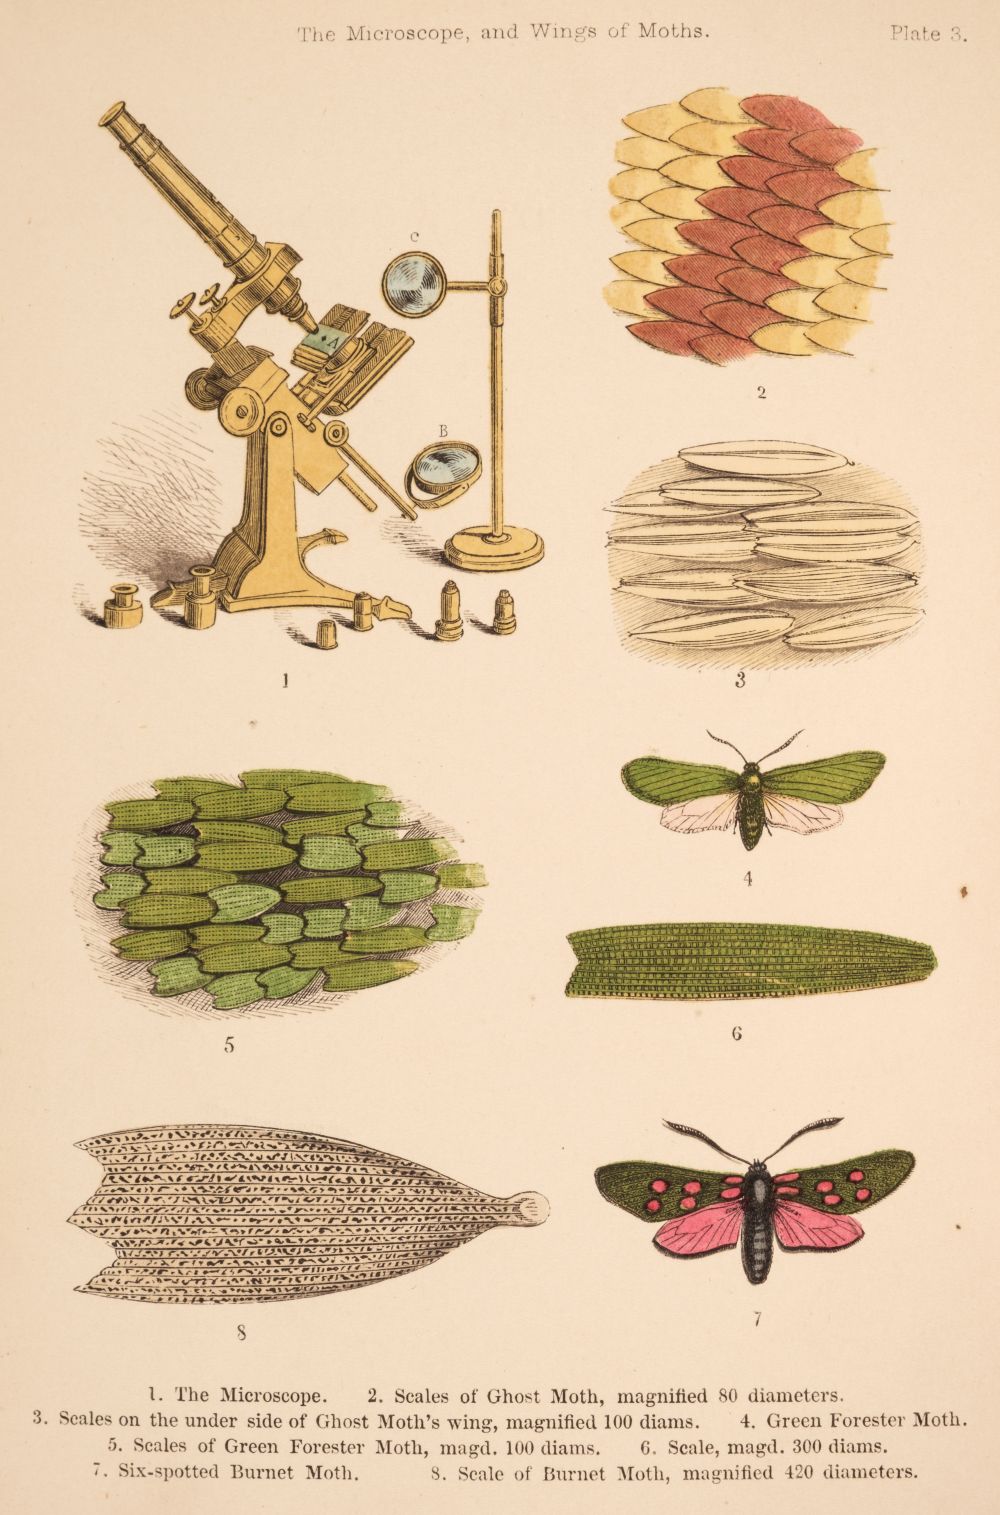 Ward (Mary). A World of Wonders Revealed by The Microscope, A Book for Young Students, 1858 - Image 2 of 2